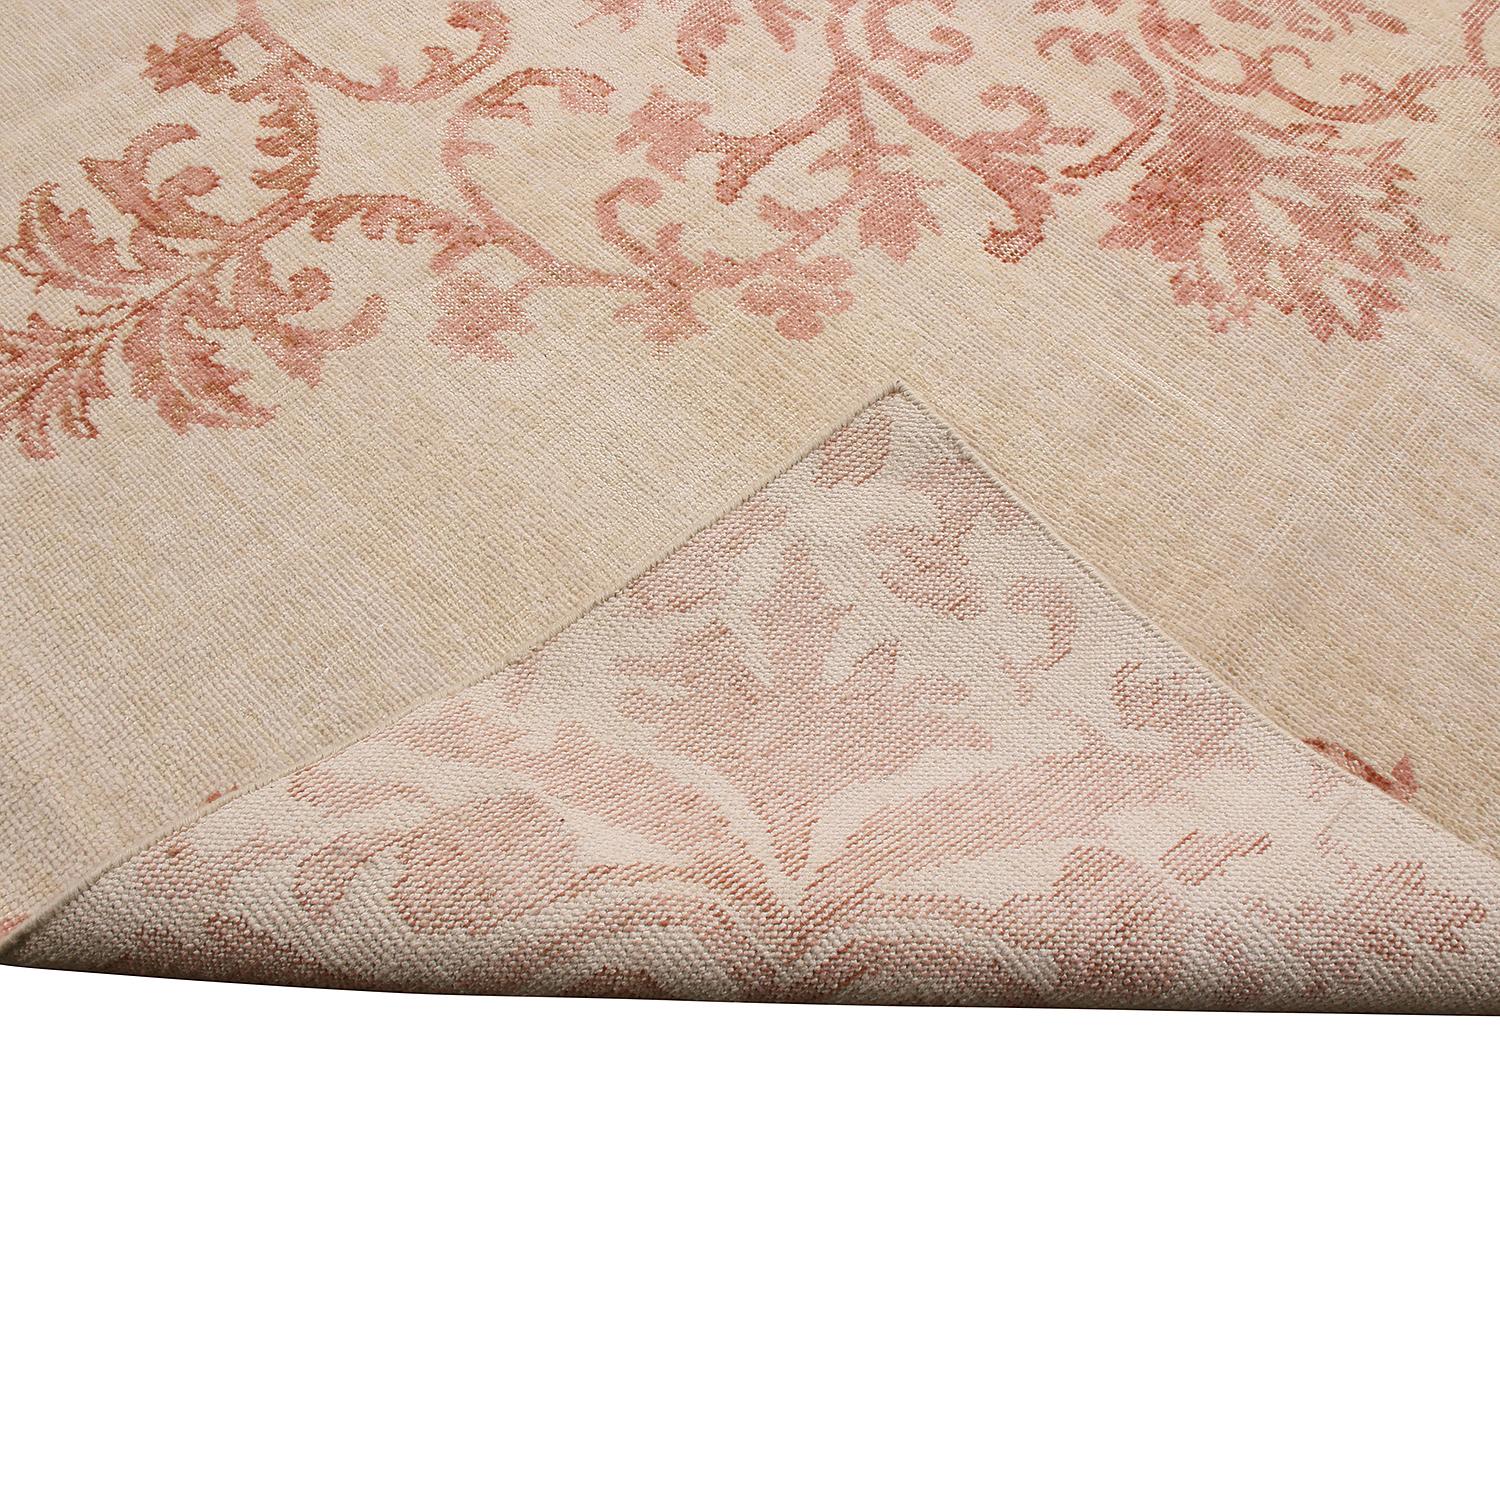 Hand-Knotted Rug & Kilim’s Beige and Pink Medallion-Style Wool Rug from the Homage Collection For Sale